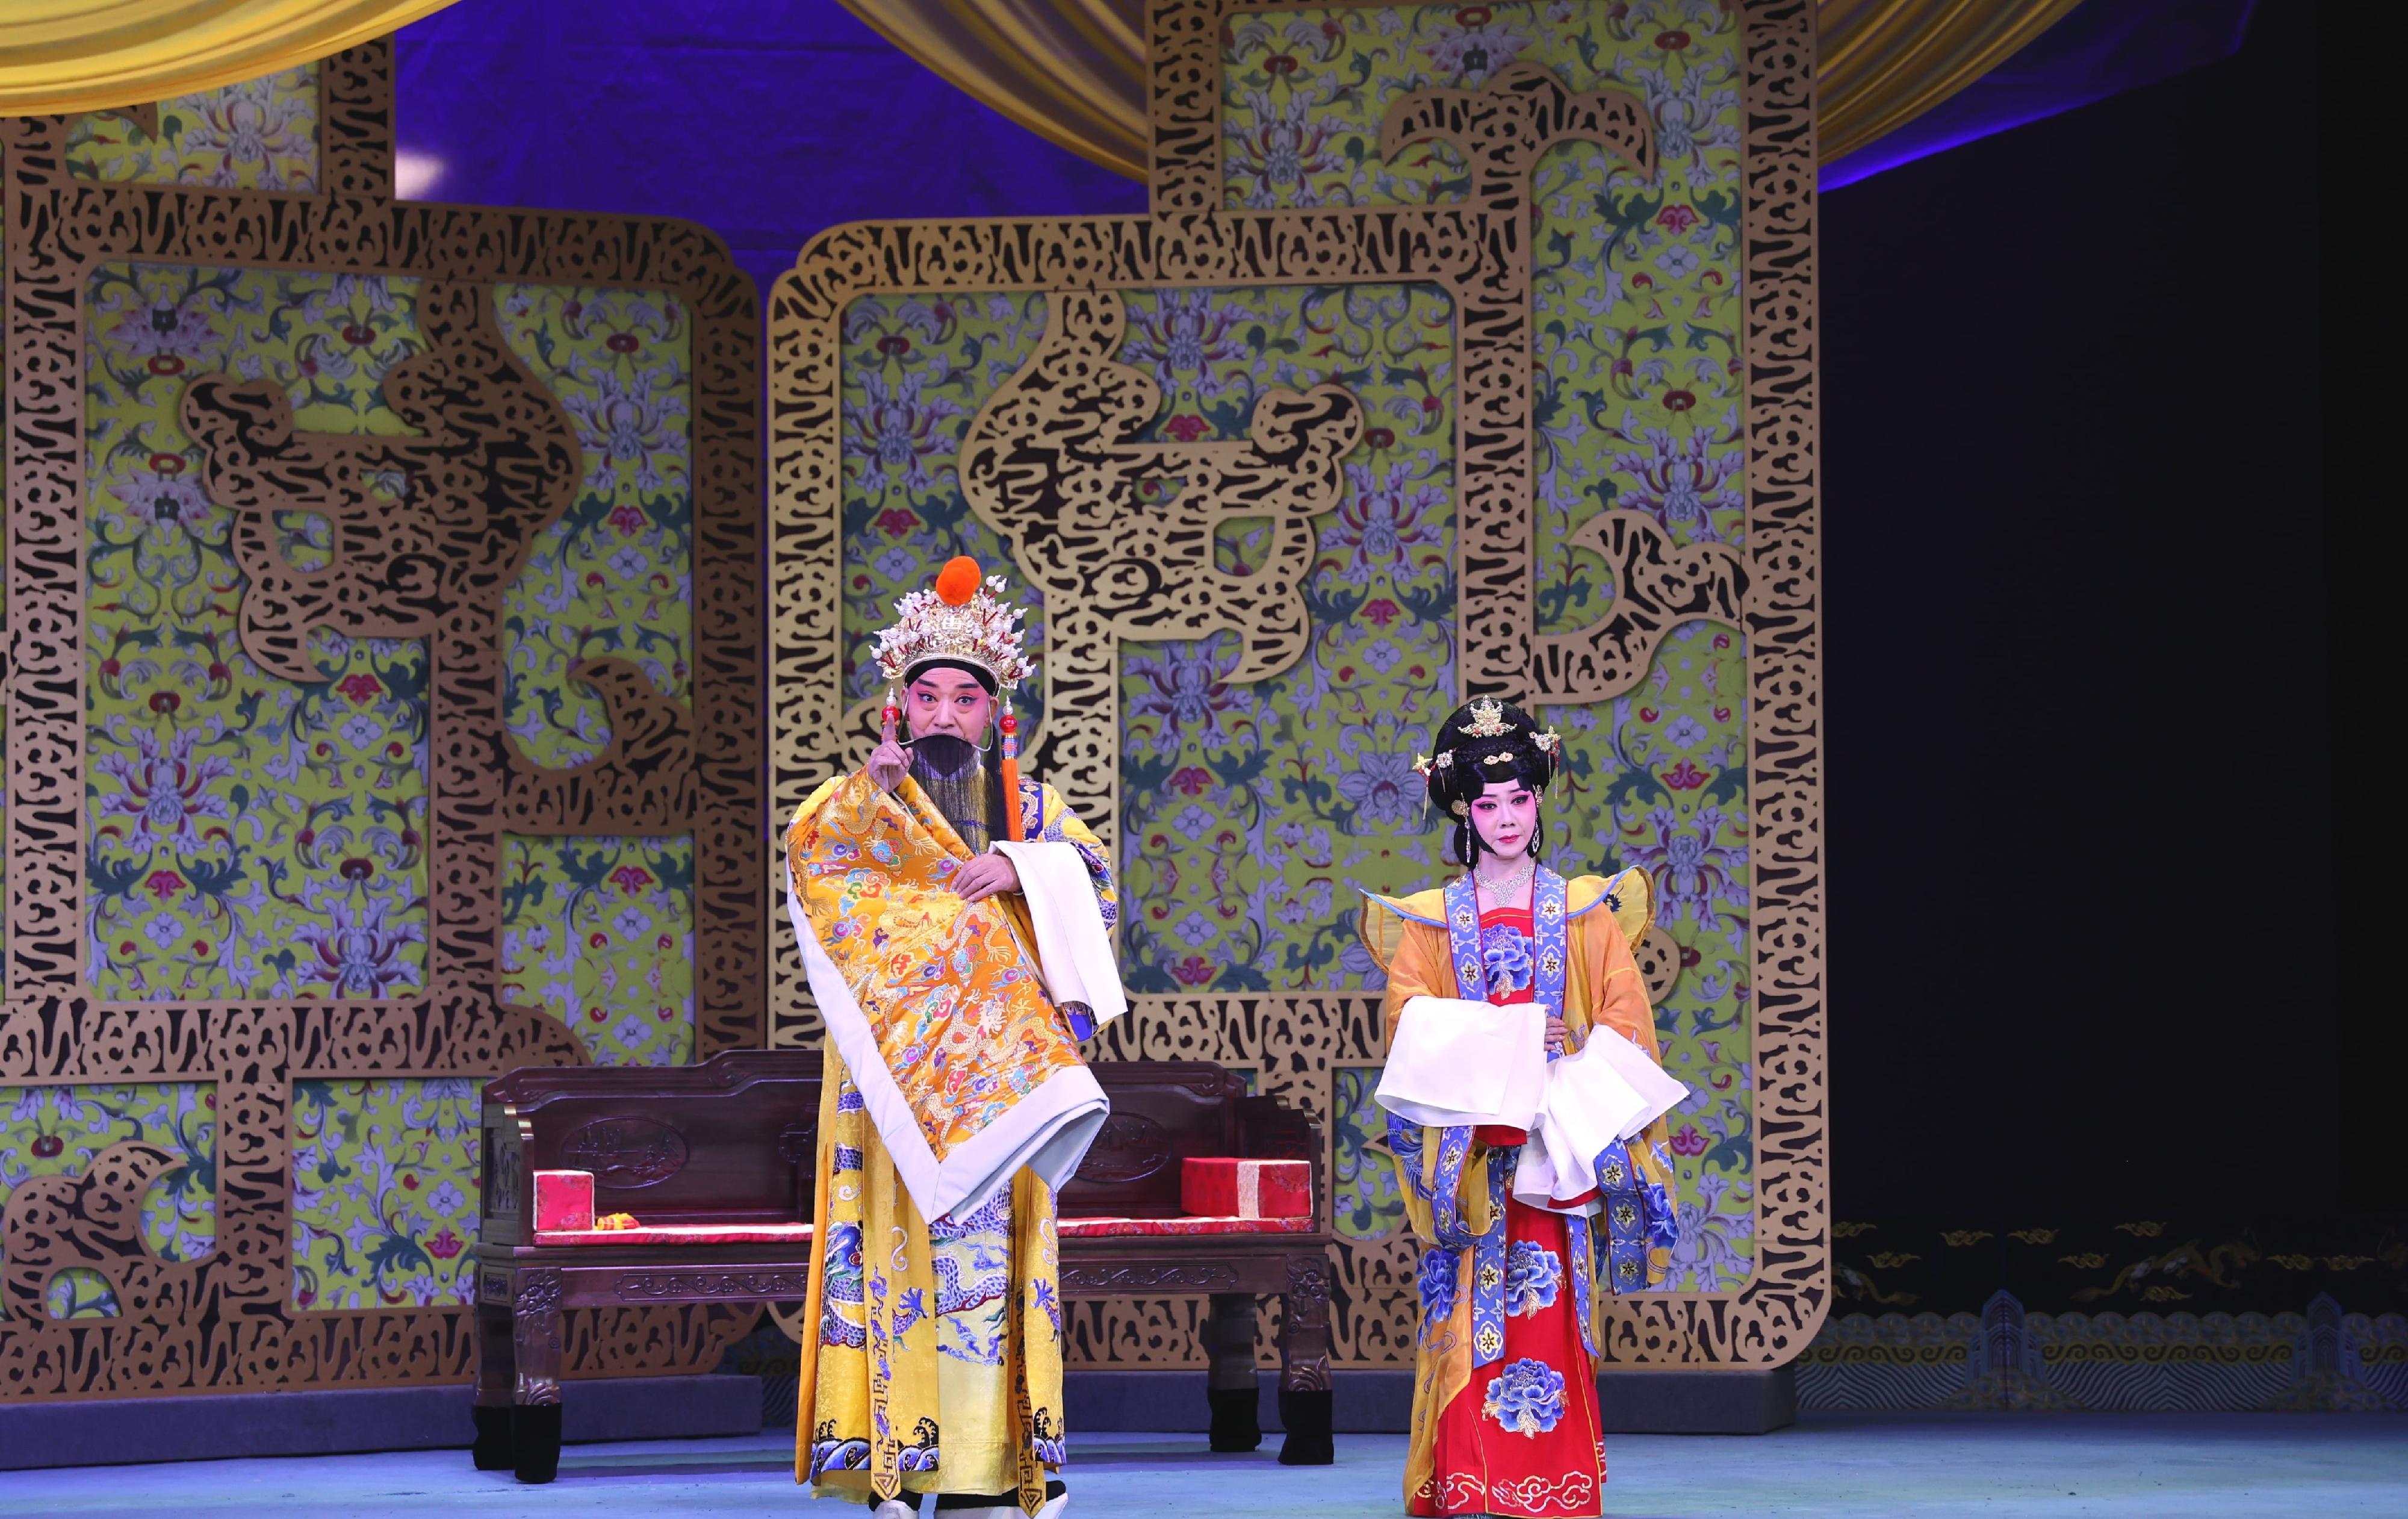 The inaugural Chinese Culture Festival will present two North Road Bangzi opera plays in June. Photo shows a scene from the North Road Bangzi opera performance "Sobering Up after Being Drunk".
